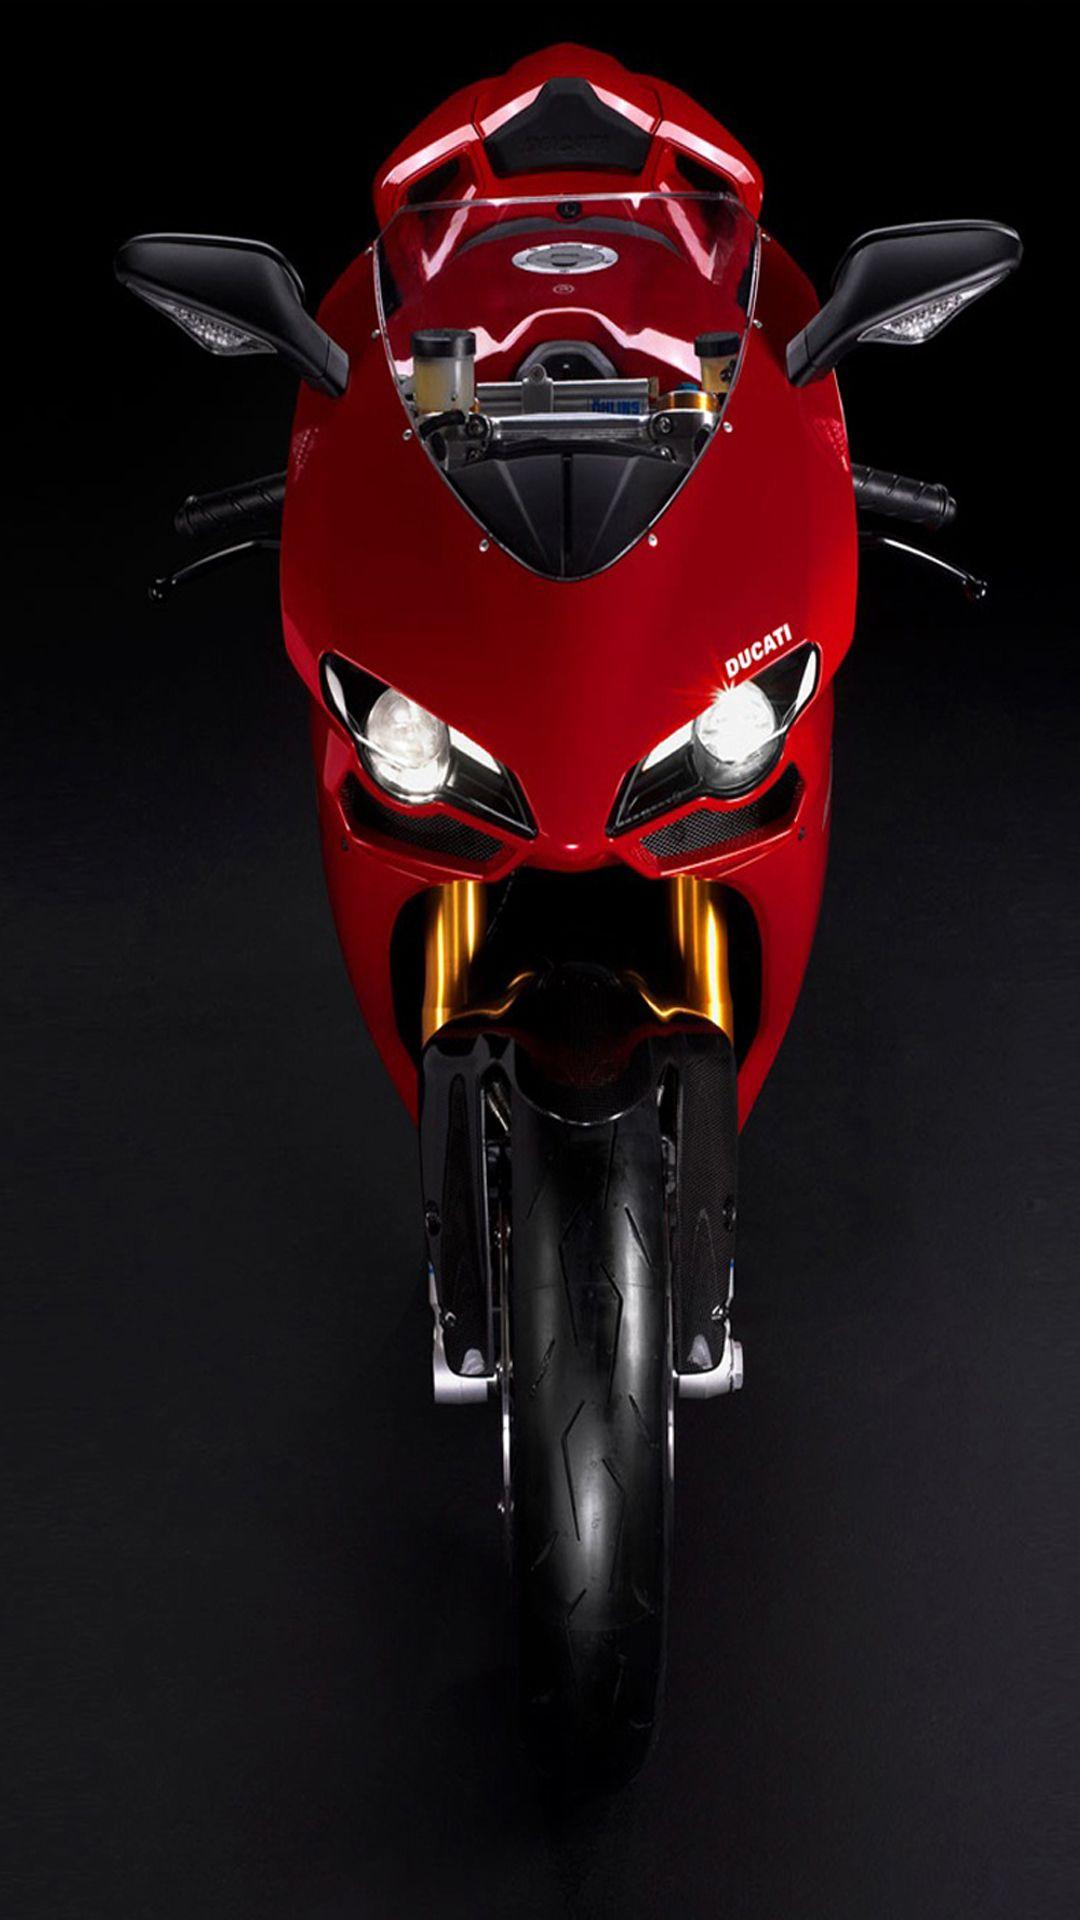 Ducati 1198 Superbike Red Android Wallpaper free download